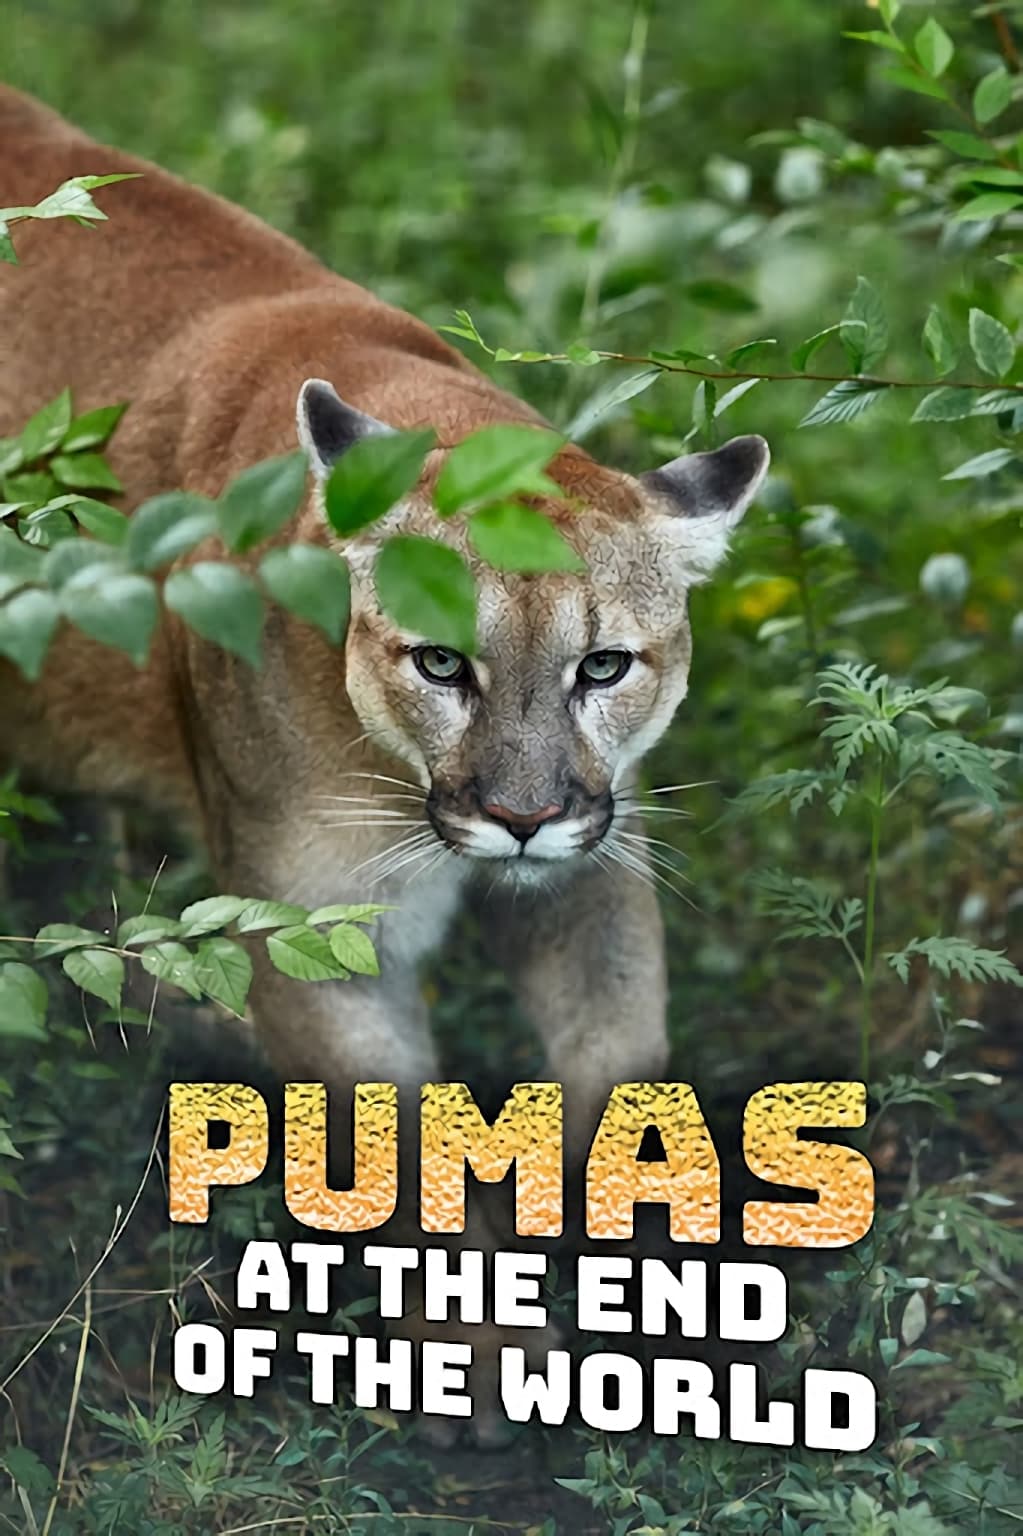 Pumas At The End of The World